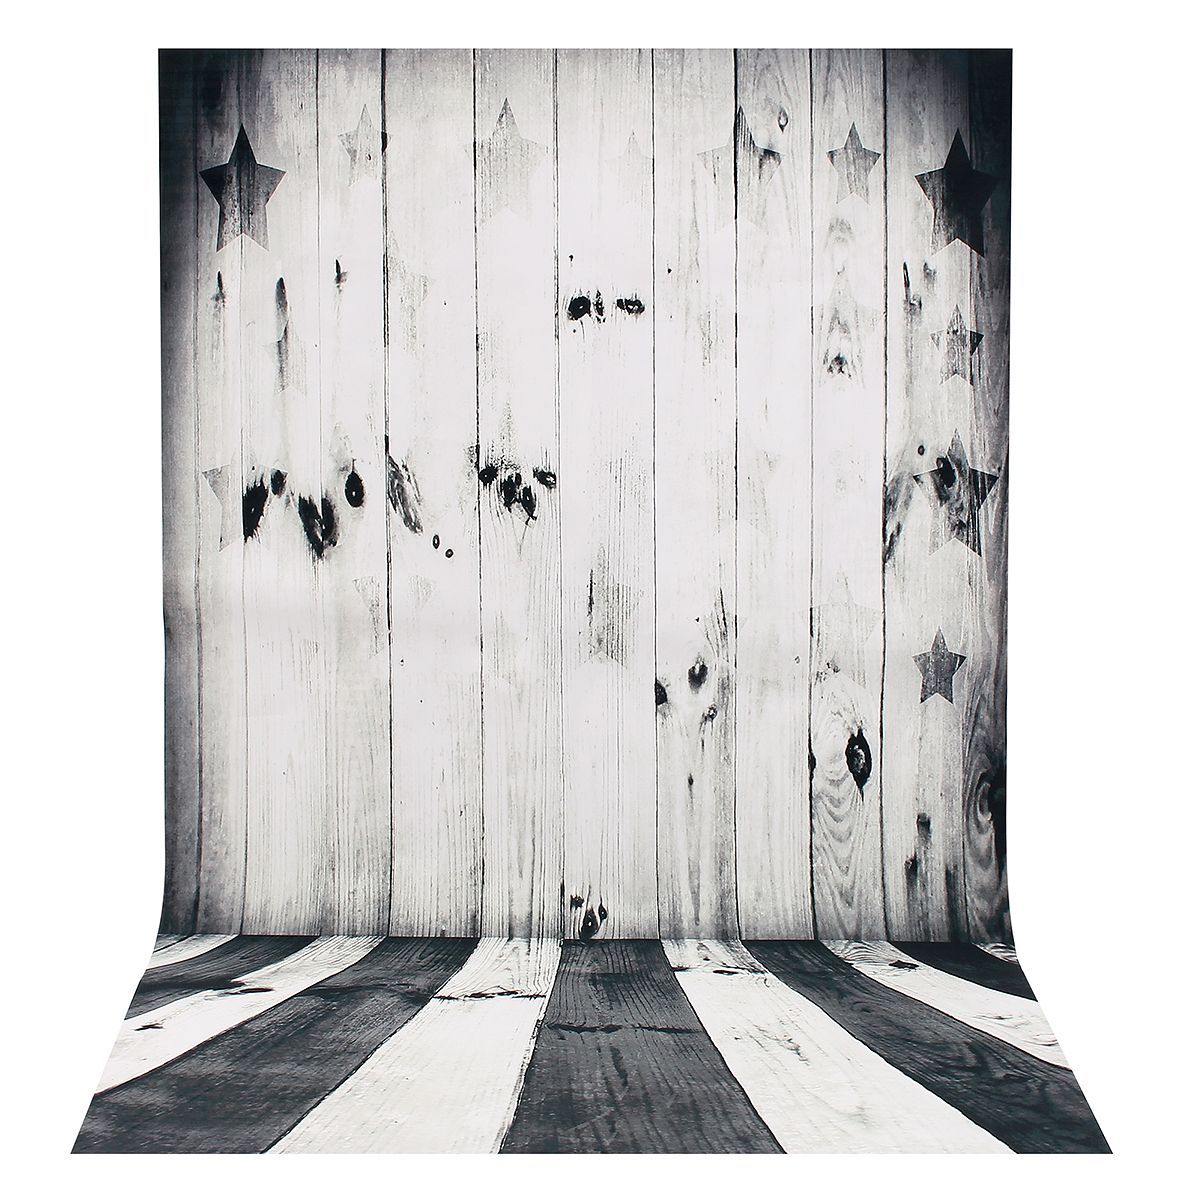 35x23-Inch-Black-White-Wall-Floor-Photography-Backdrop-Background-Studio-Prop-1420359